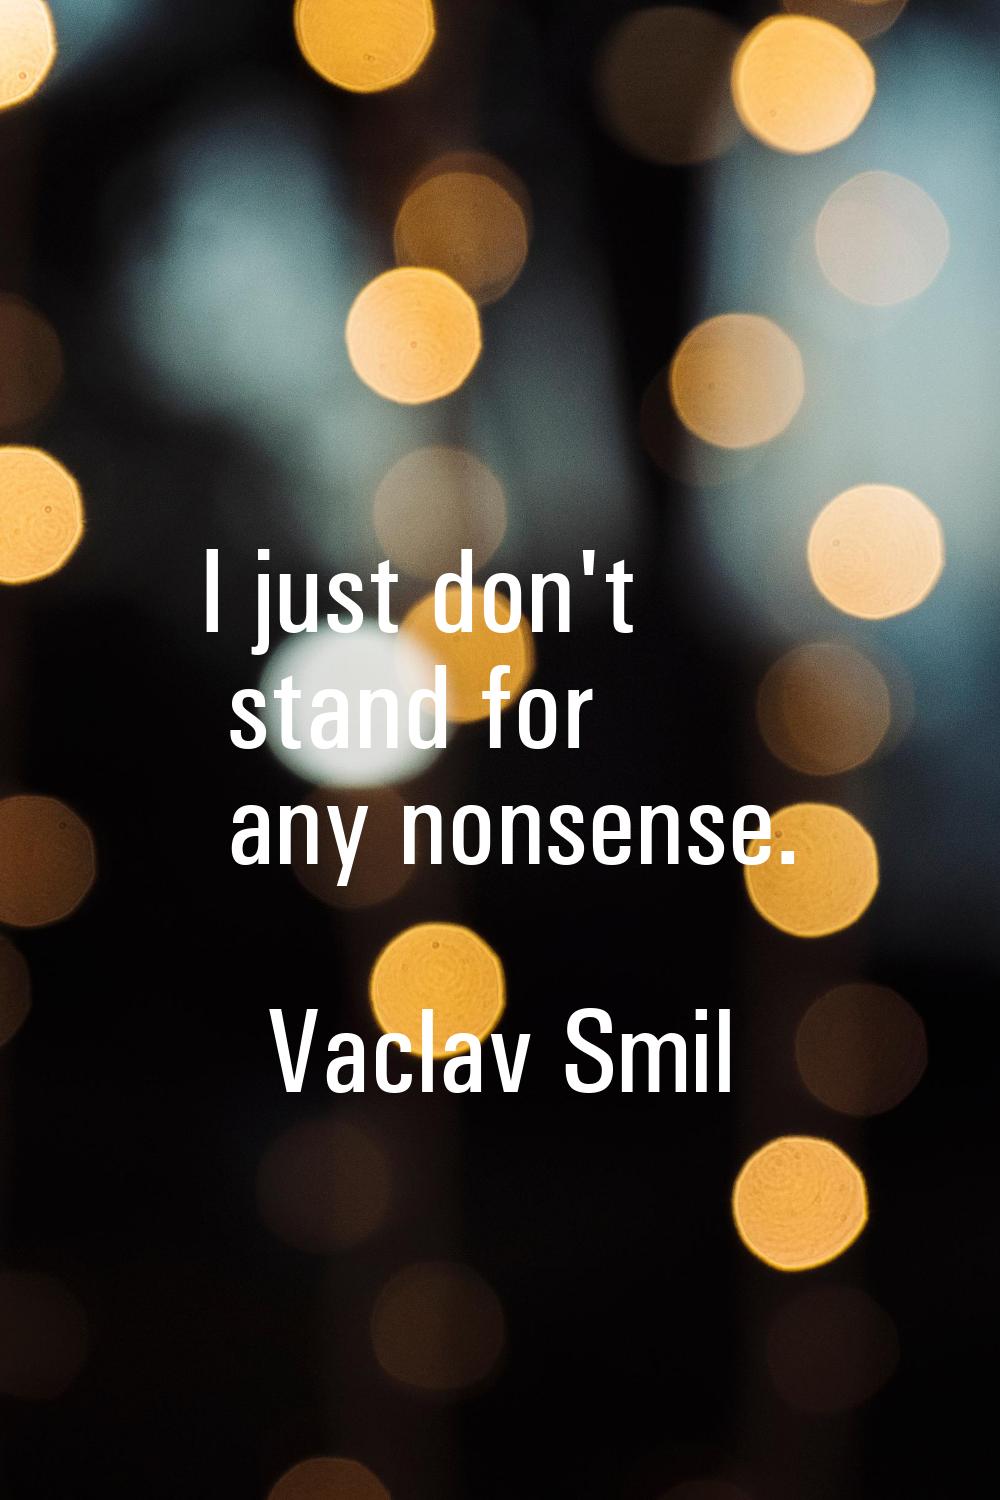 I just don't stand for any nonsense.